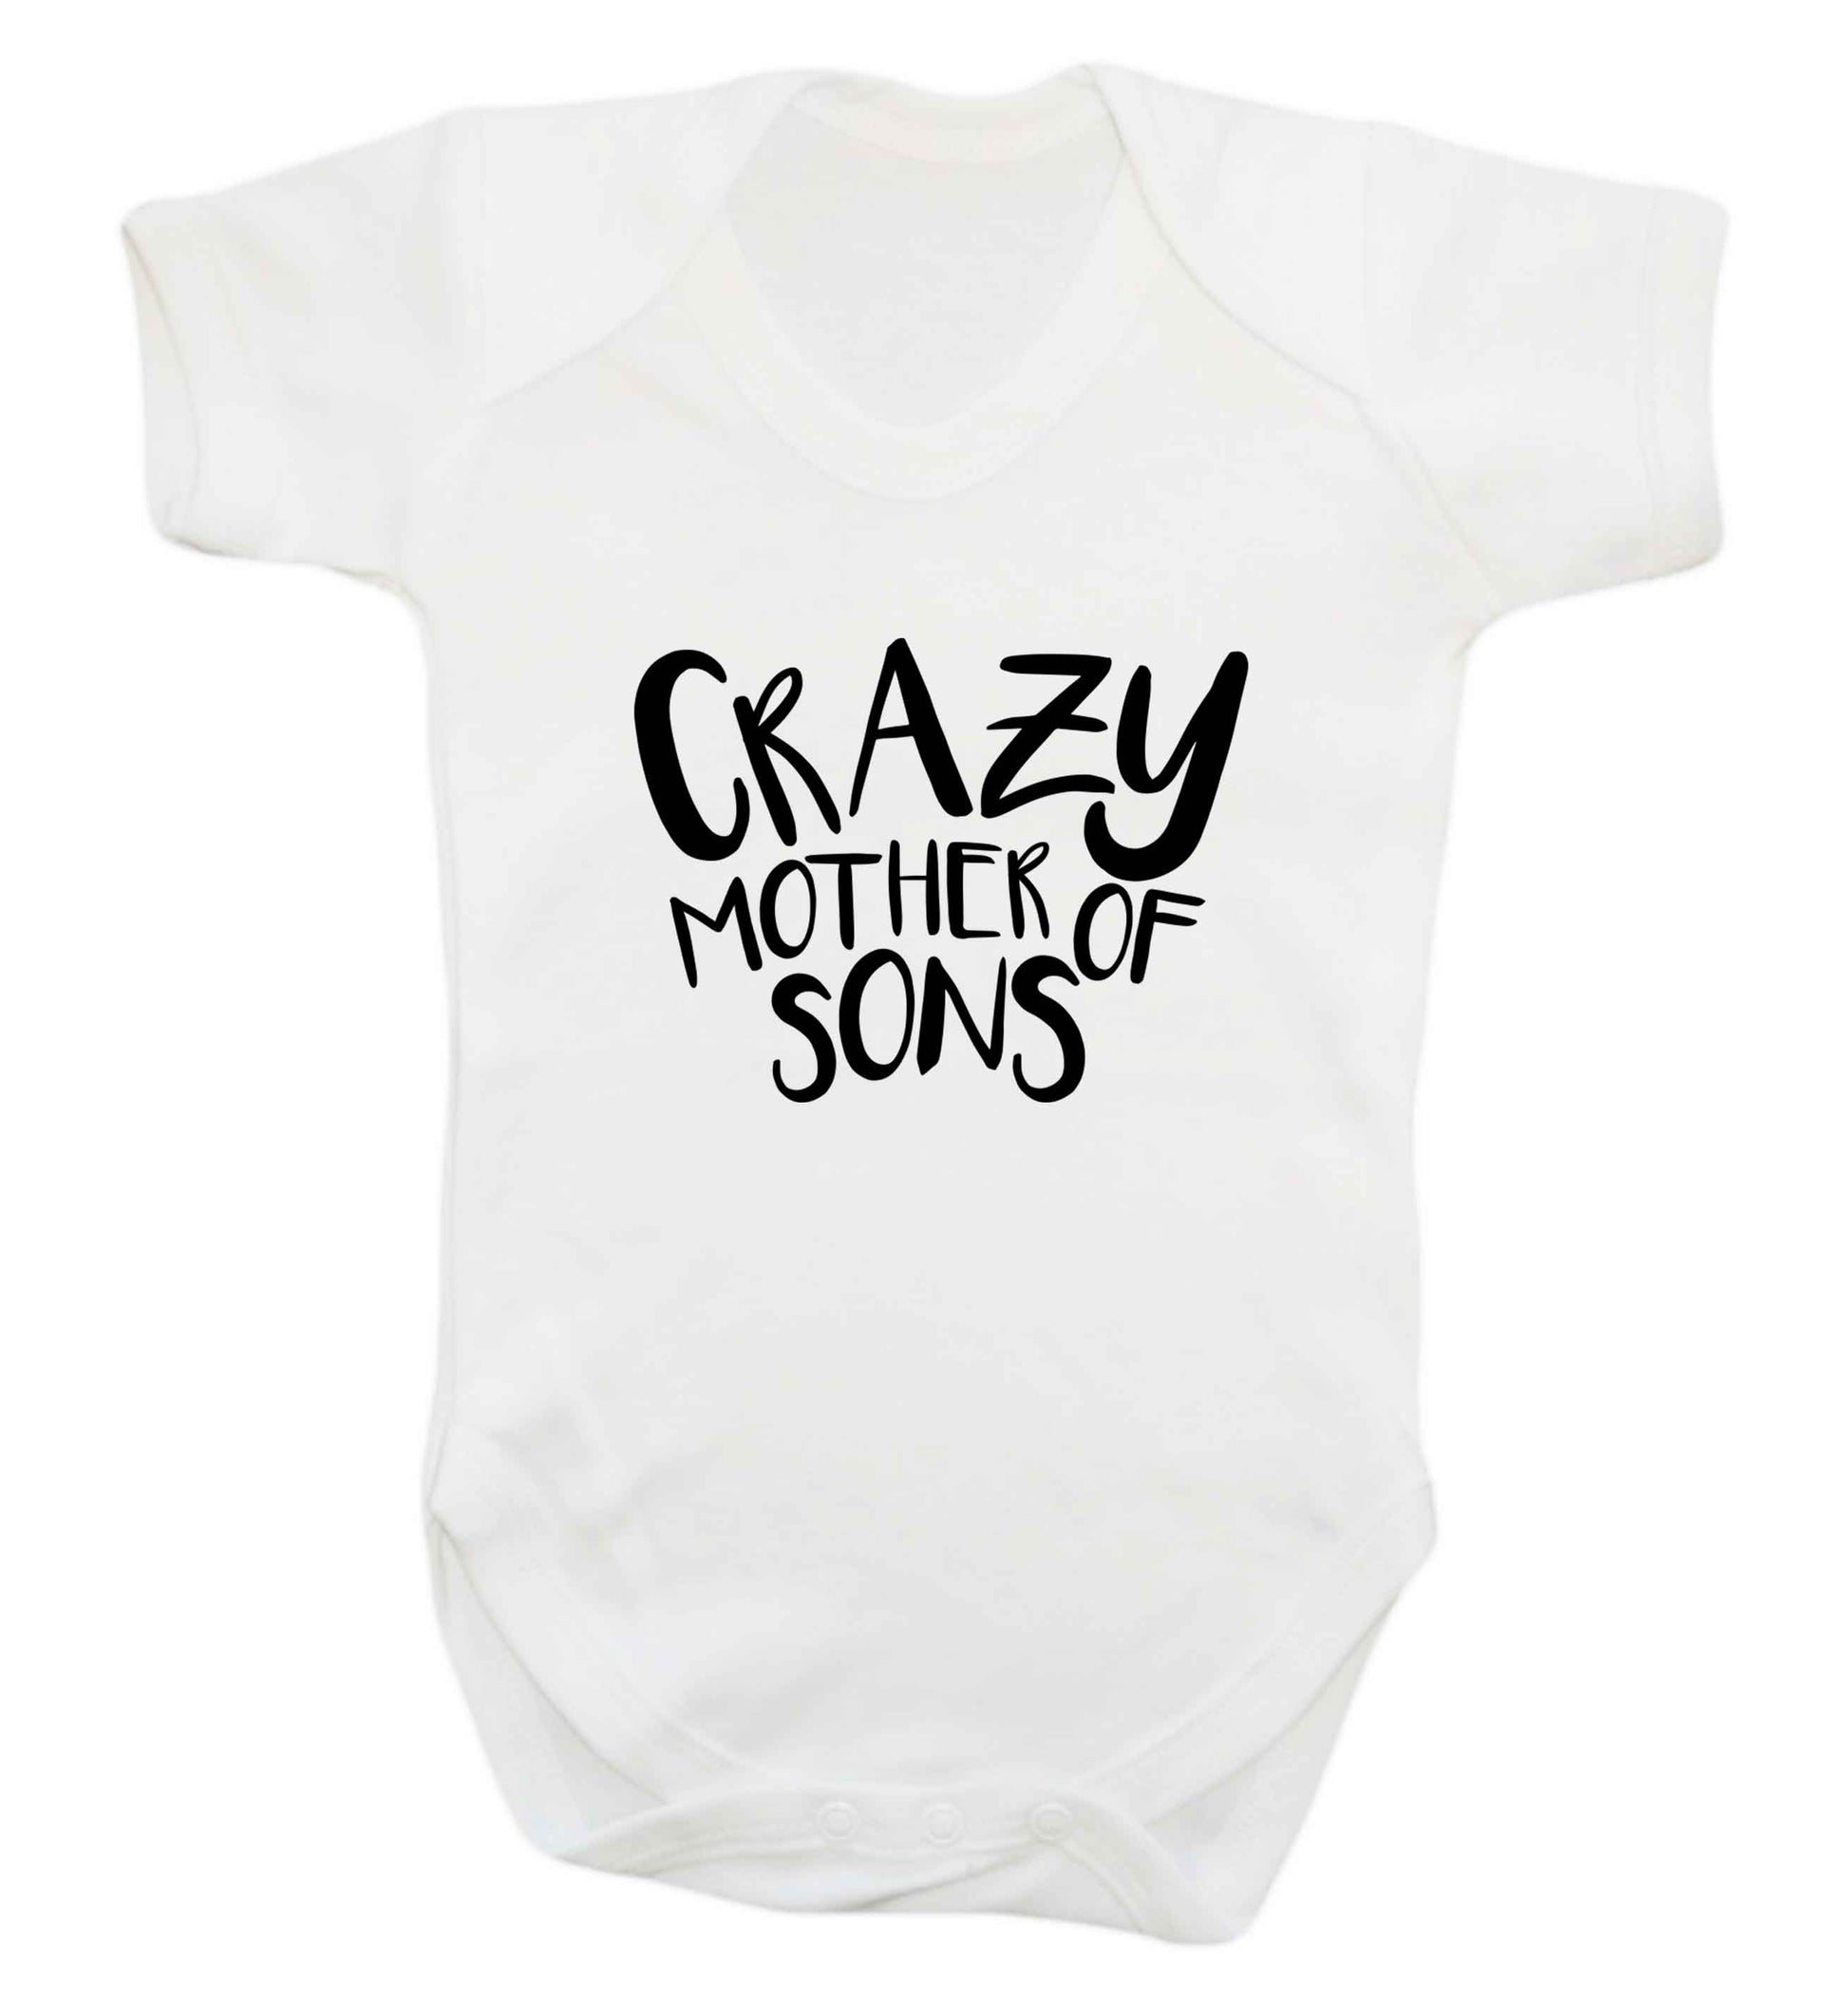 Crazy mother of sons baby vest white 18-24 months